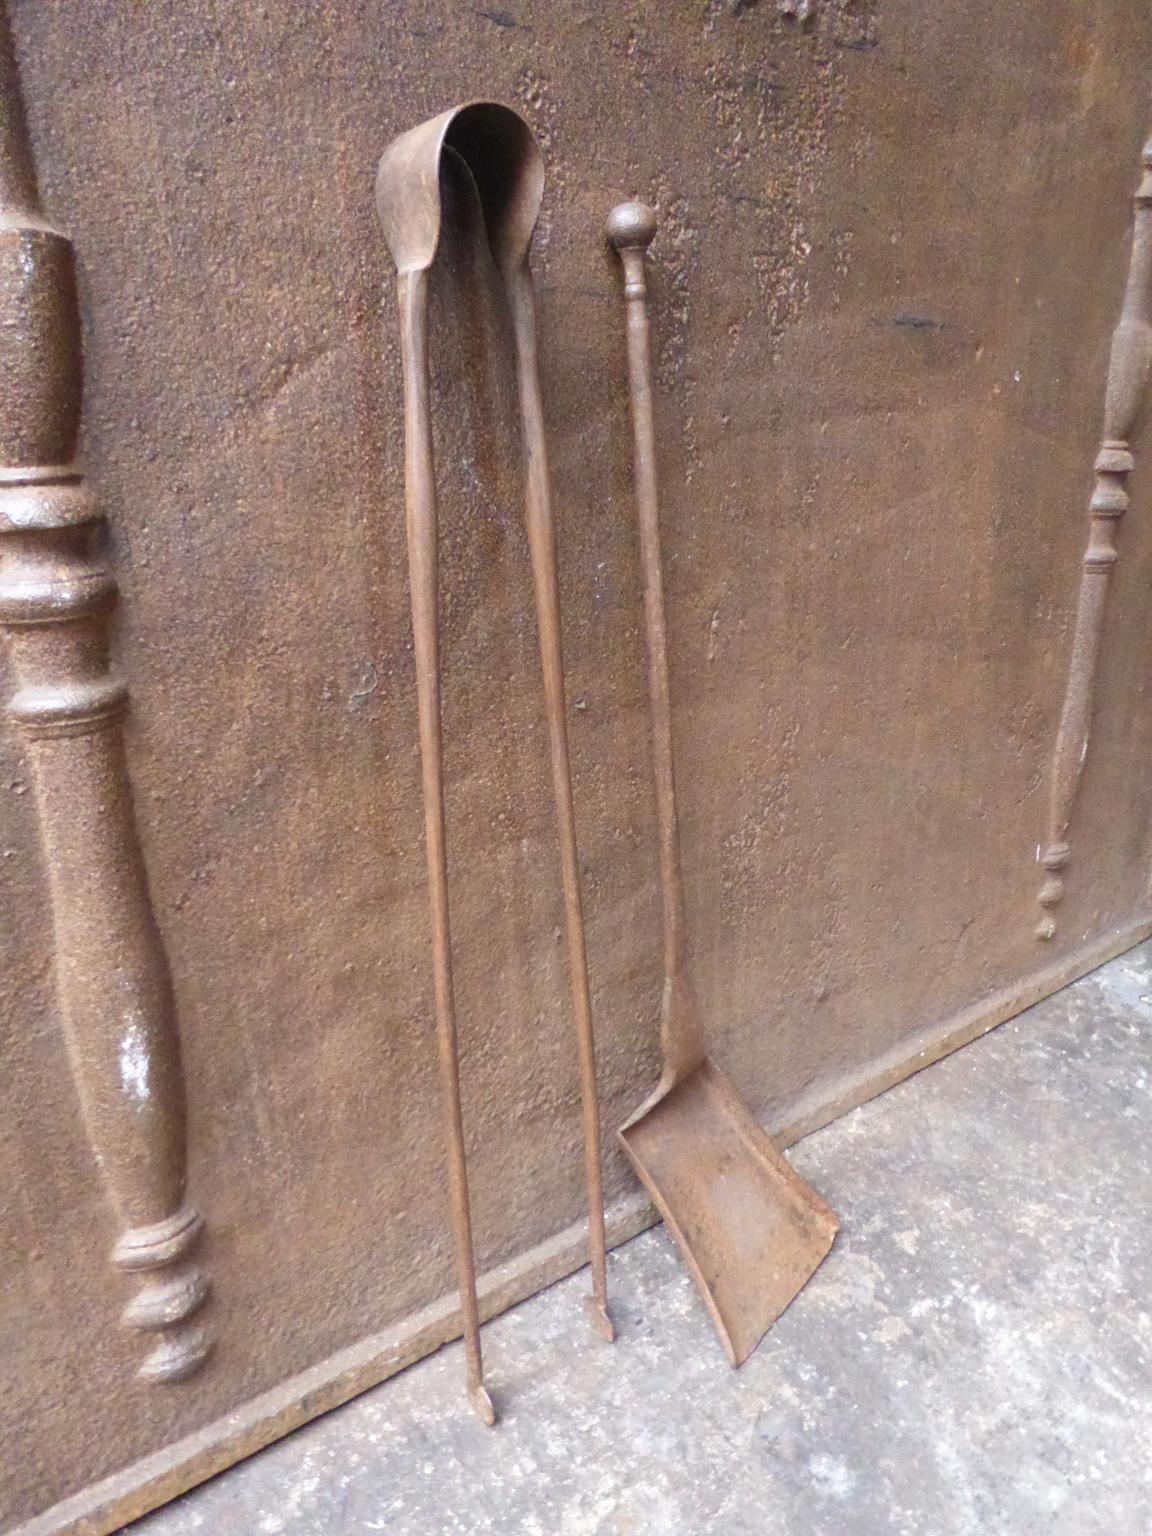 18th century French Louis XV fireplace tool set consisting of fireplace tongs and a shovel. The fire irons are made of wrought iron. They are in a good condition and are fully functional.